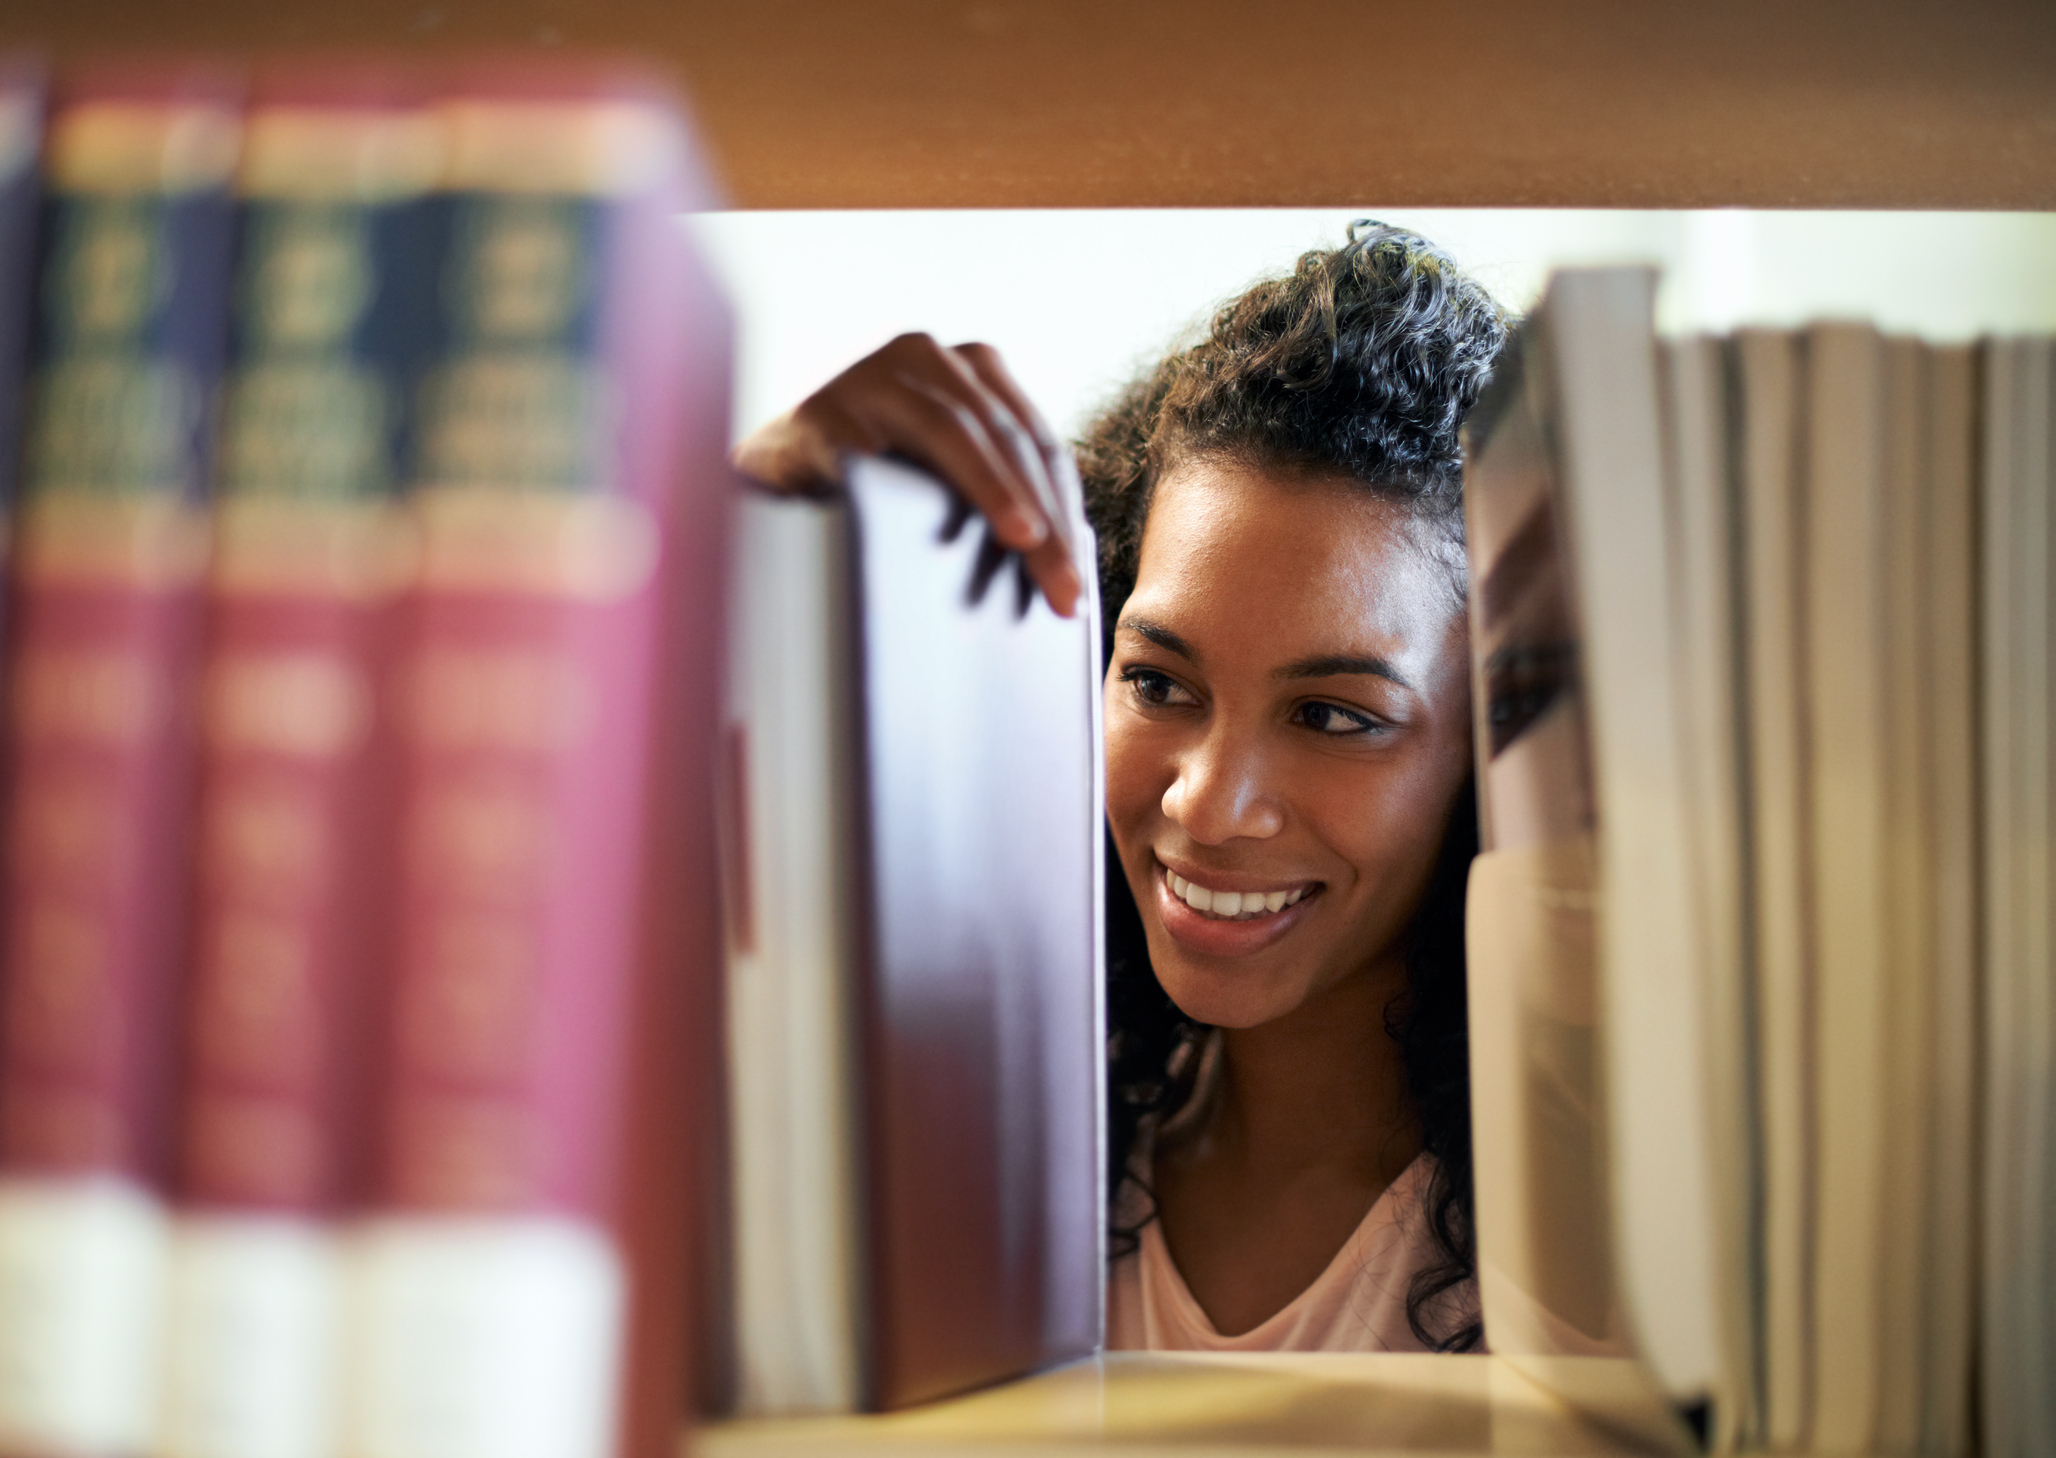 A women smiling looking at books on shelf.